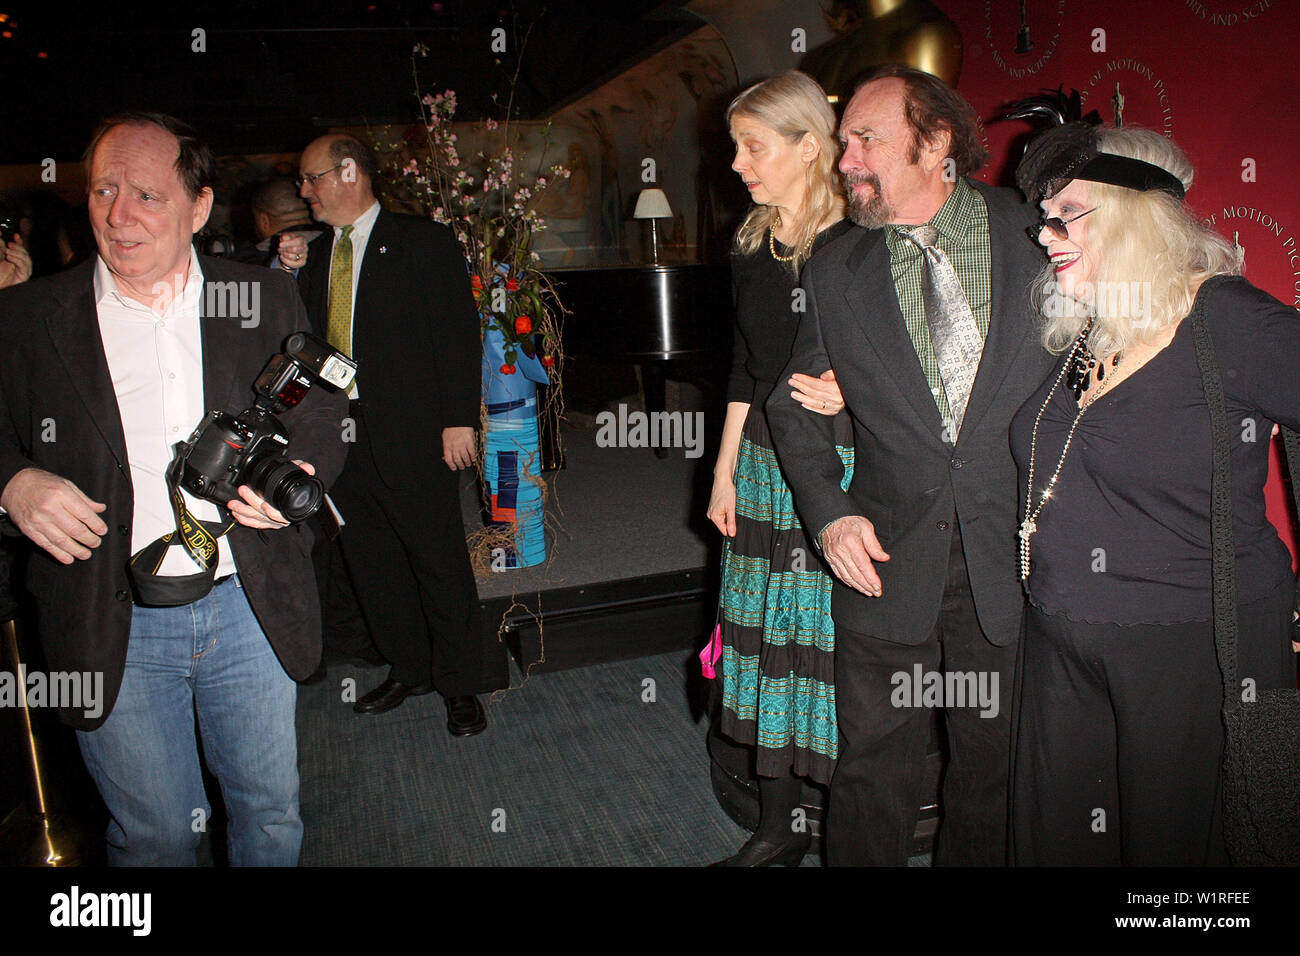 New York, NY - February 22:  Richard Corkery, Amy Wright, Actor, Rip Torn, and Actress, Sylvia Miles at the 81st Annual Academy Awards - Official New York Oscar Night Party at The Carlyle on February 22, 2009 in New York, NY. (Photo by Steve Mack/Alamy) Stock Photo